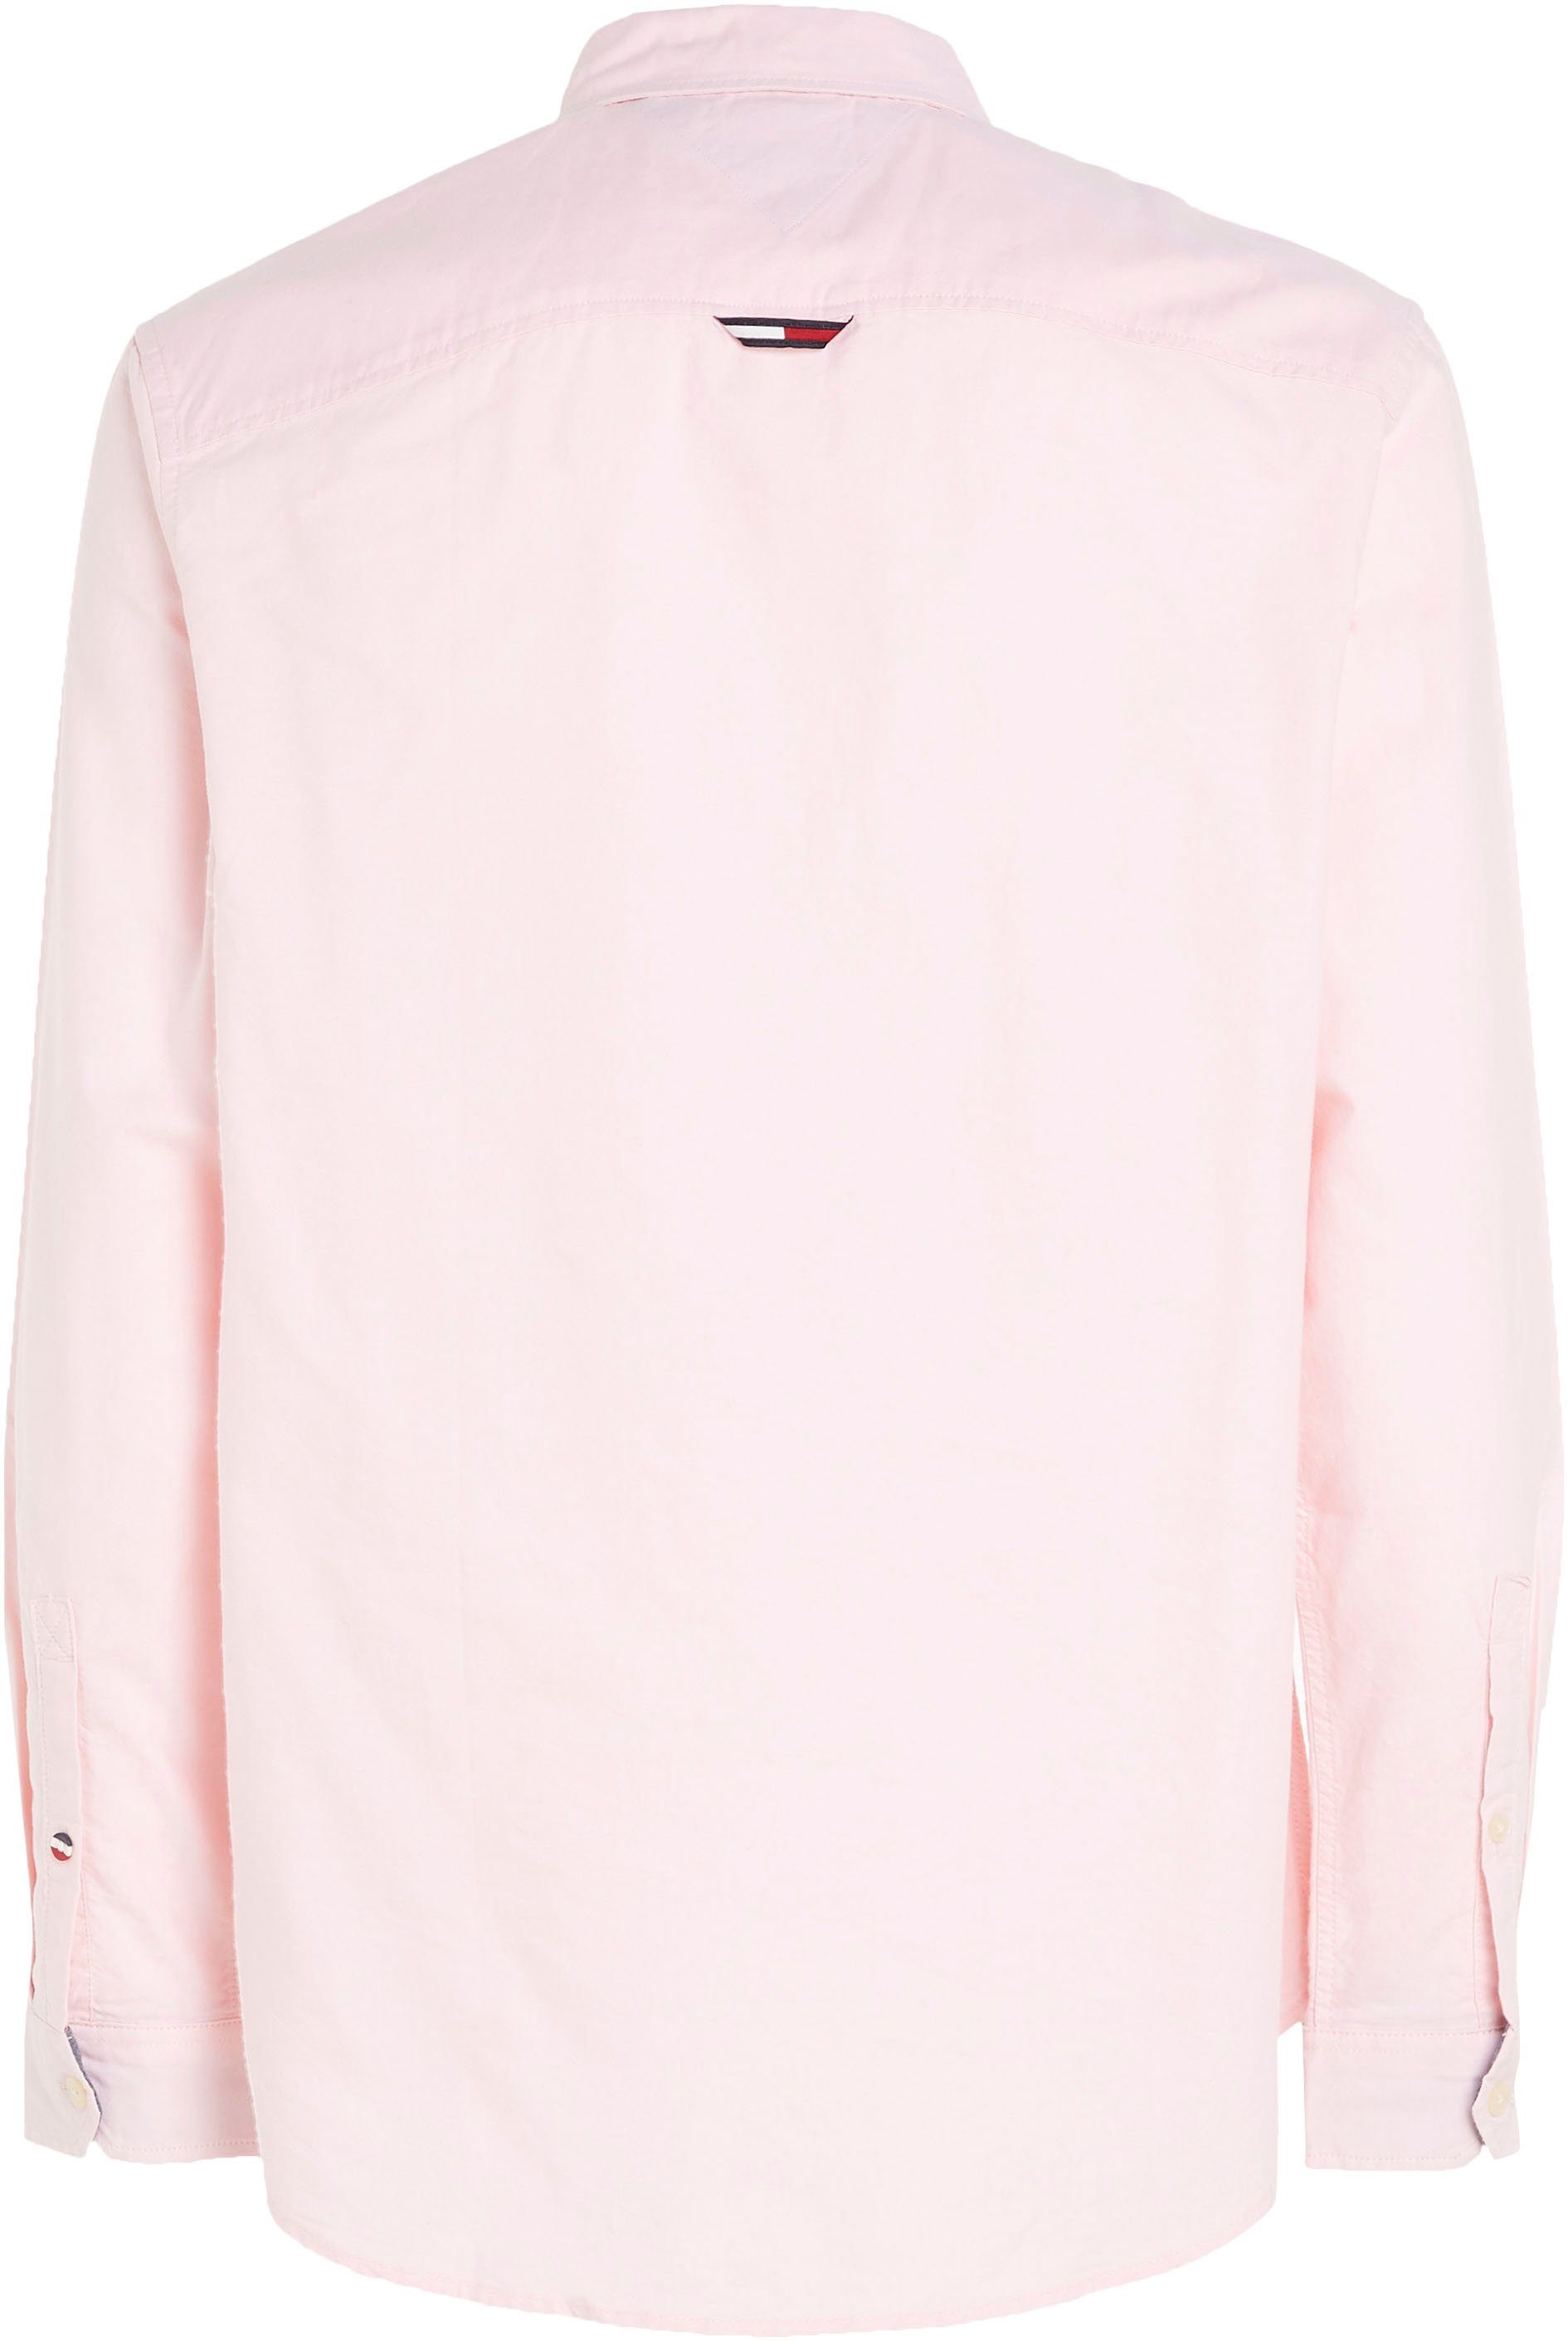 Tommy mit Jeans TJM pink Knopfleiste SHIRT OXFORD Langarmhemd CLASSIC